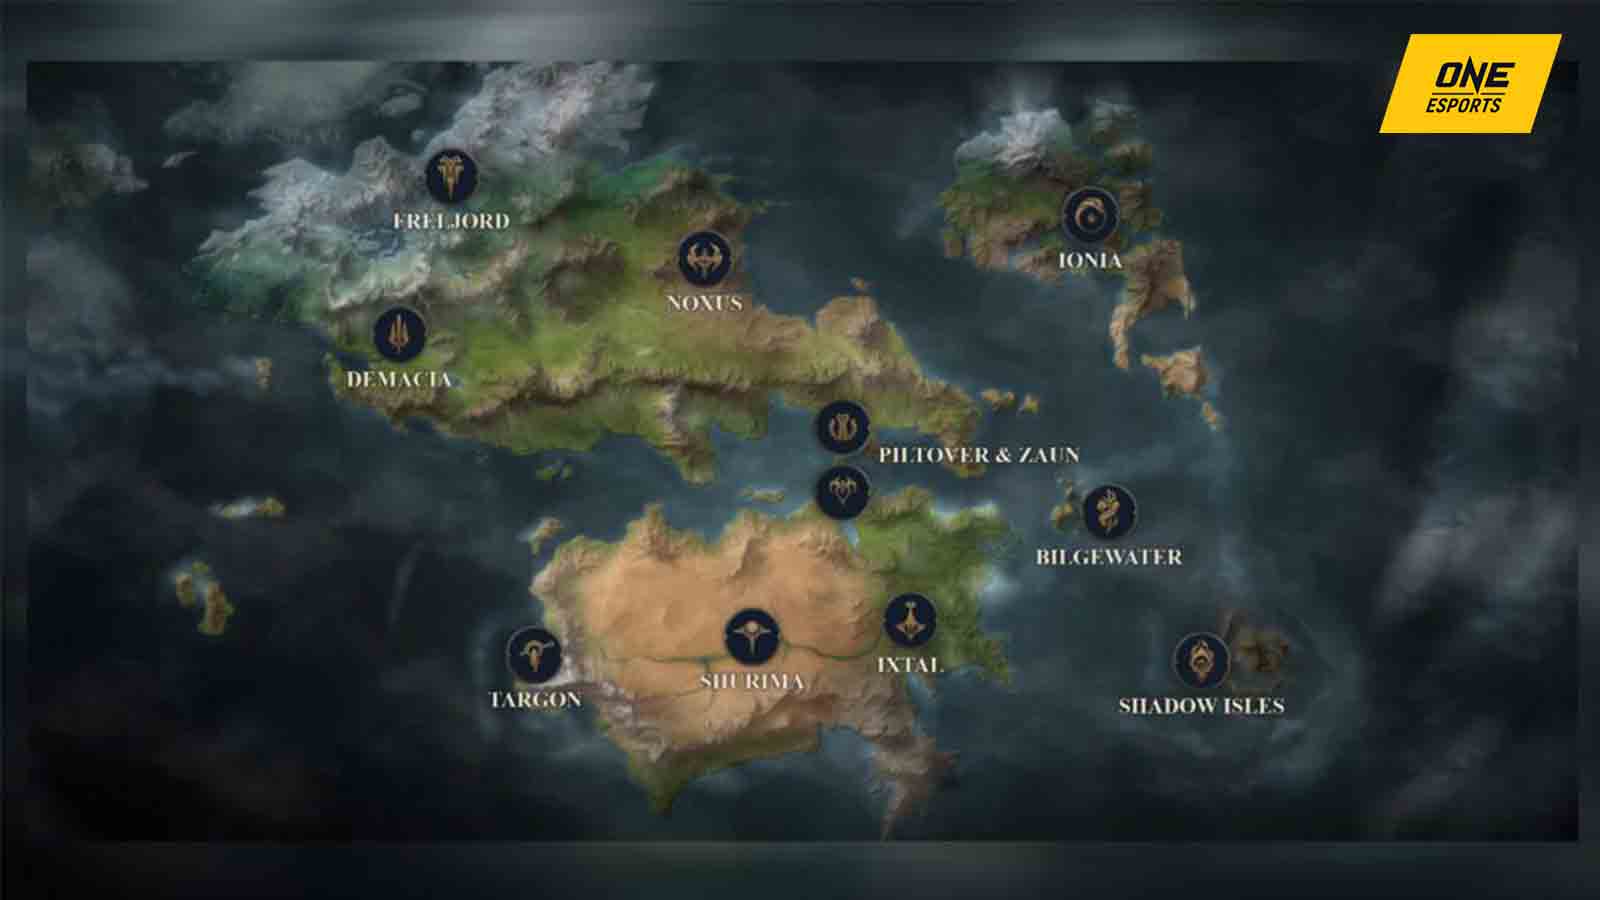 Each League of Legends Runeterra area referenced in Arcane